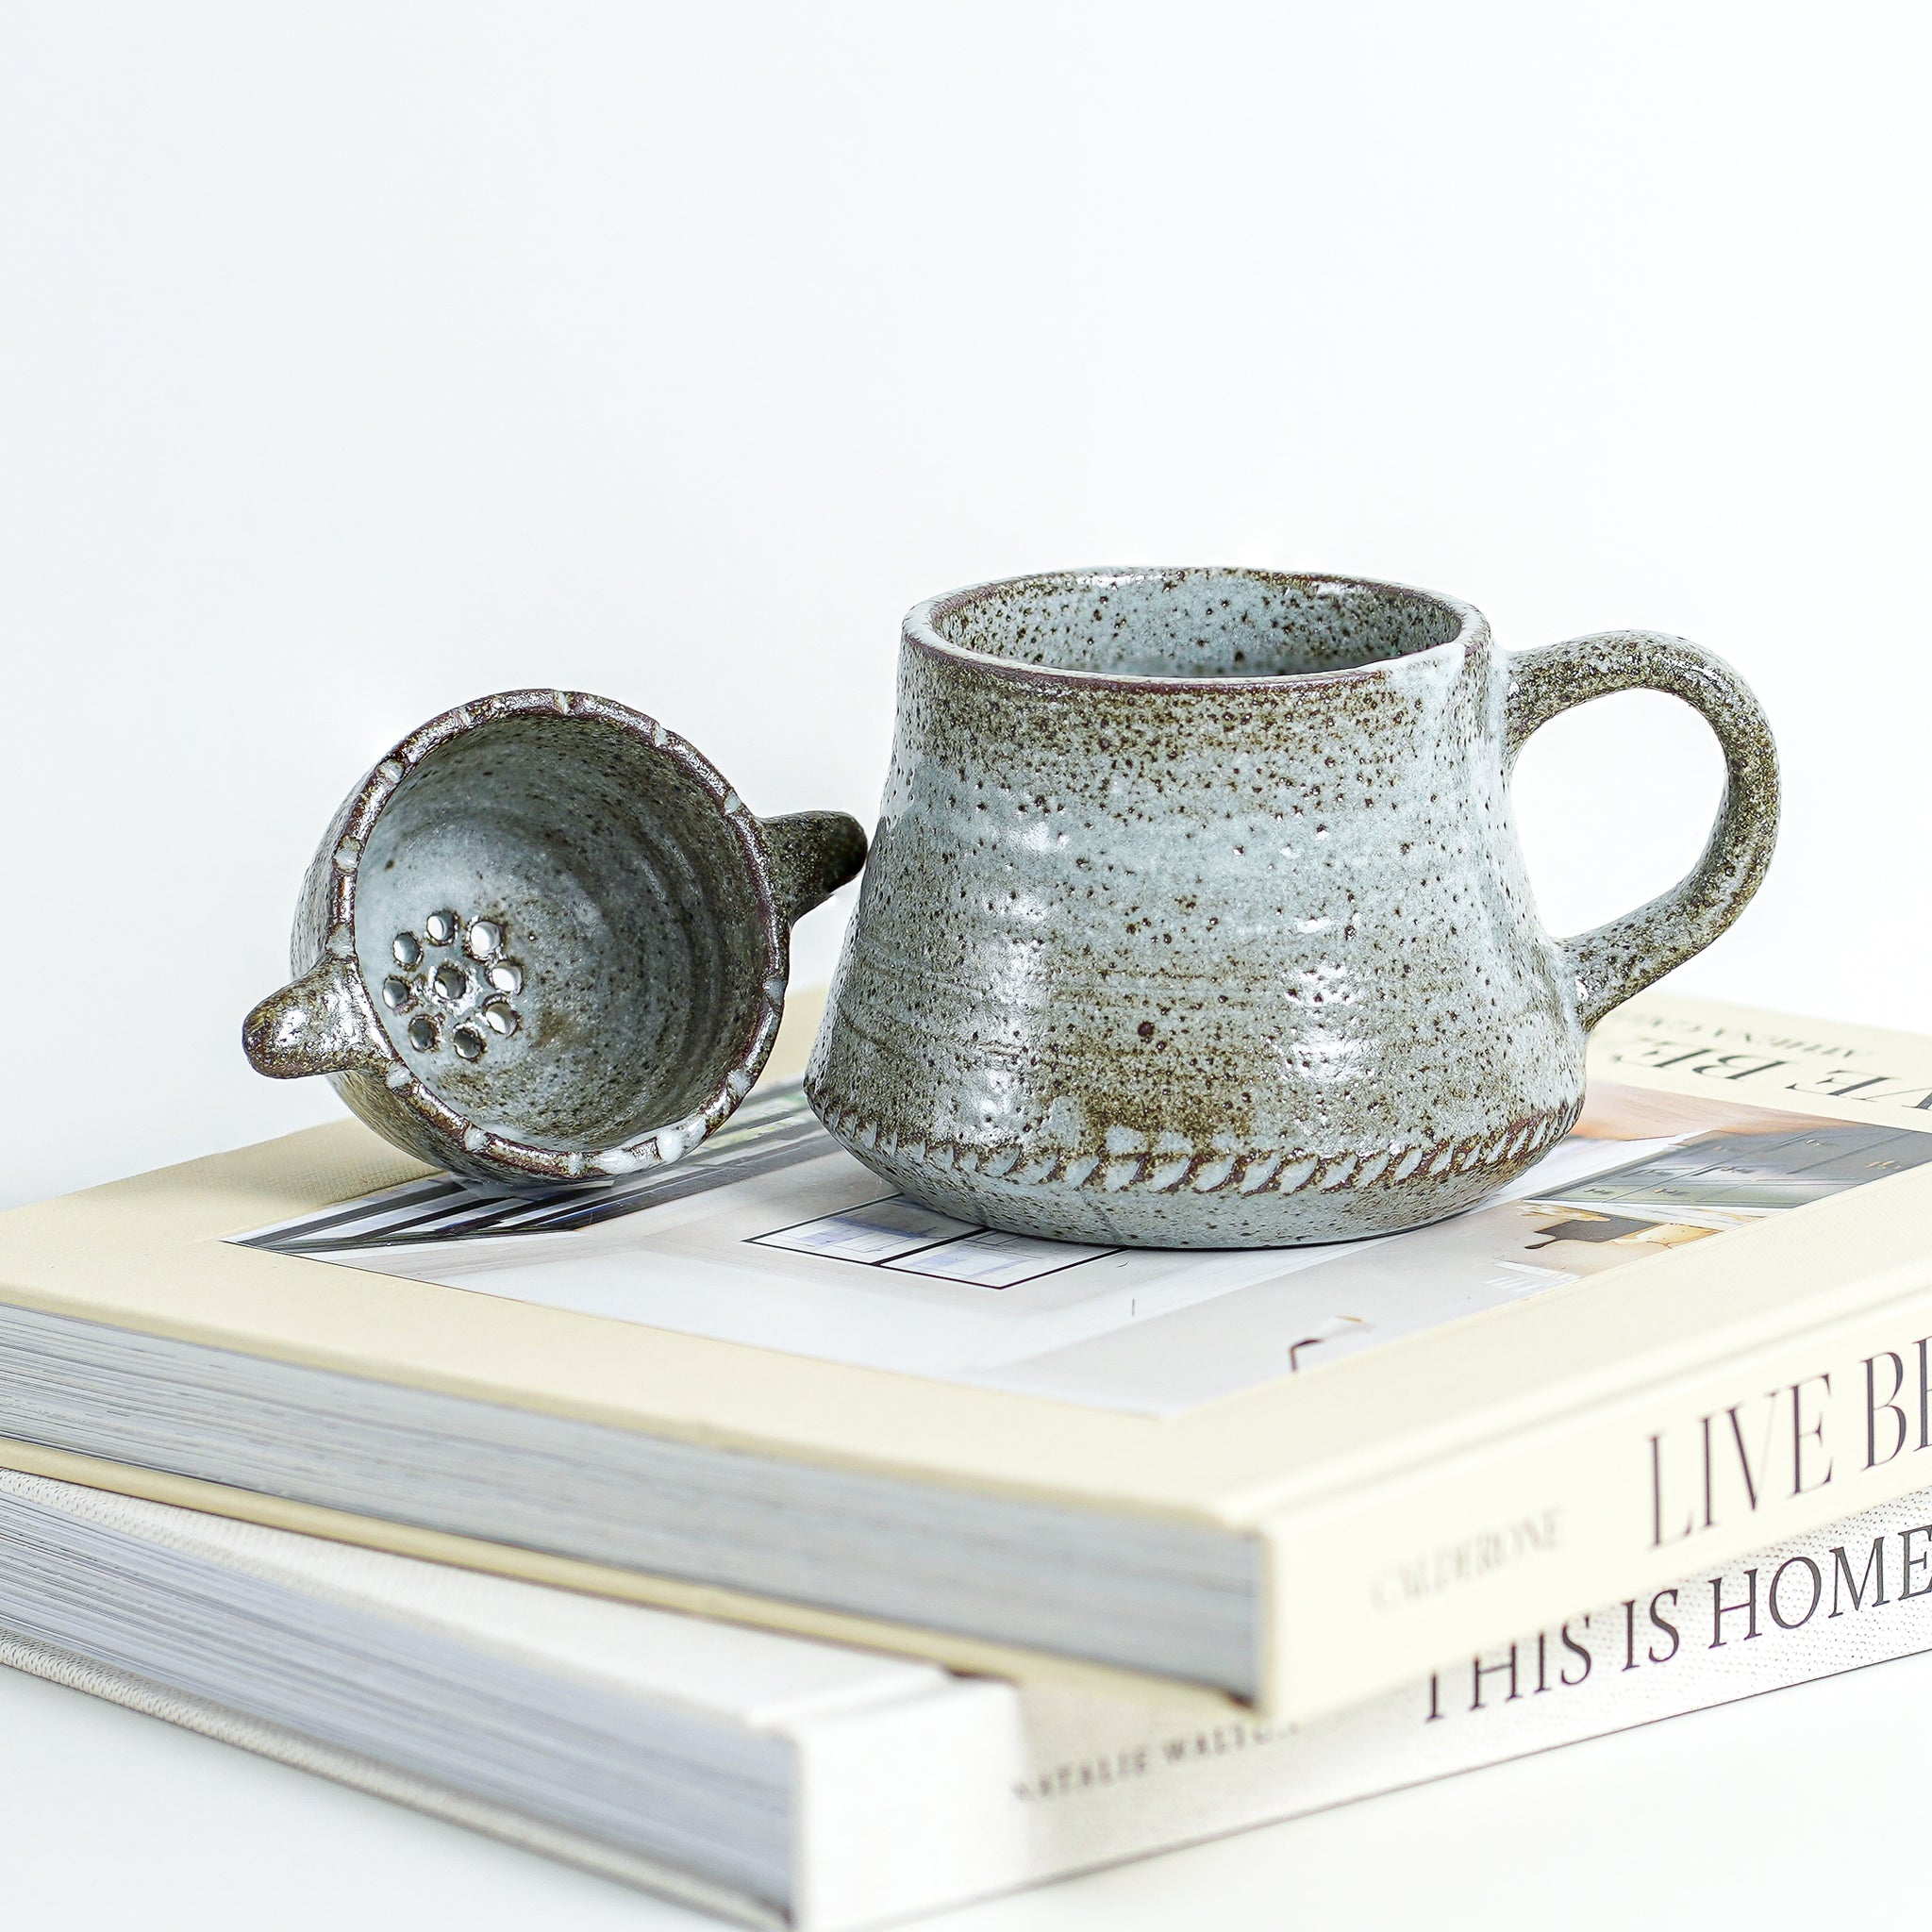 This ceramic mug set features a glossy, slightly-textured exterior and is an ideal present for yourself or someone you care about. It includes a convenient strainer for preparing loose-leaf tea blends for your morning or afternoon cup.